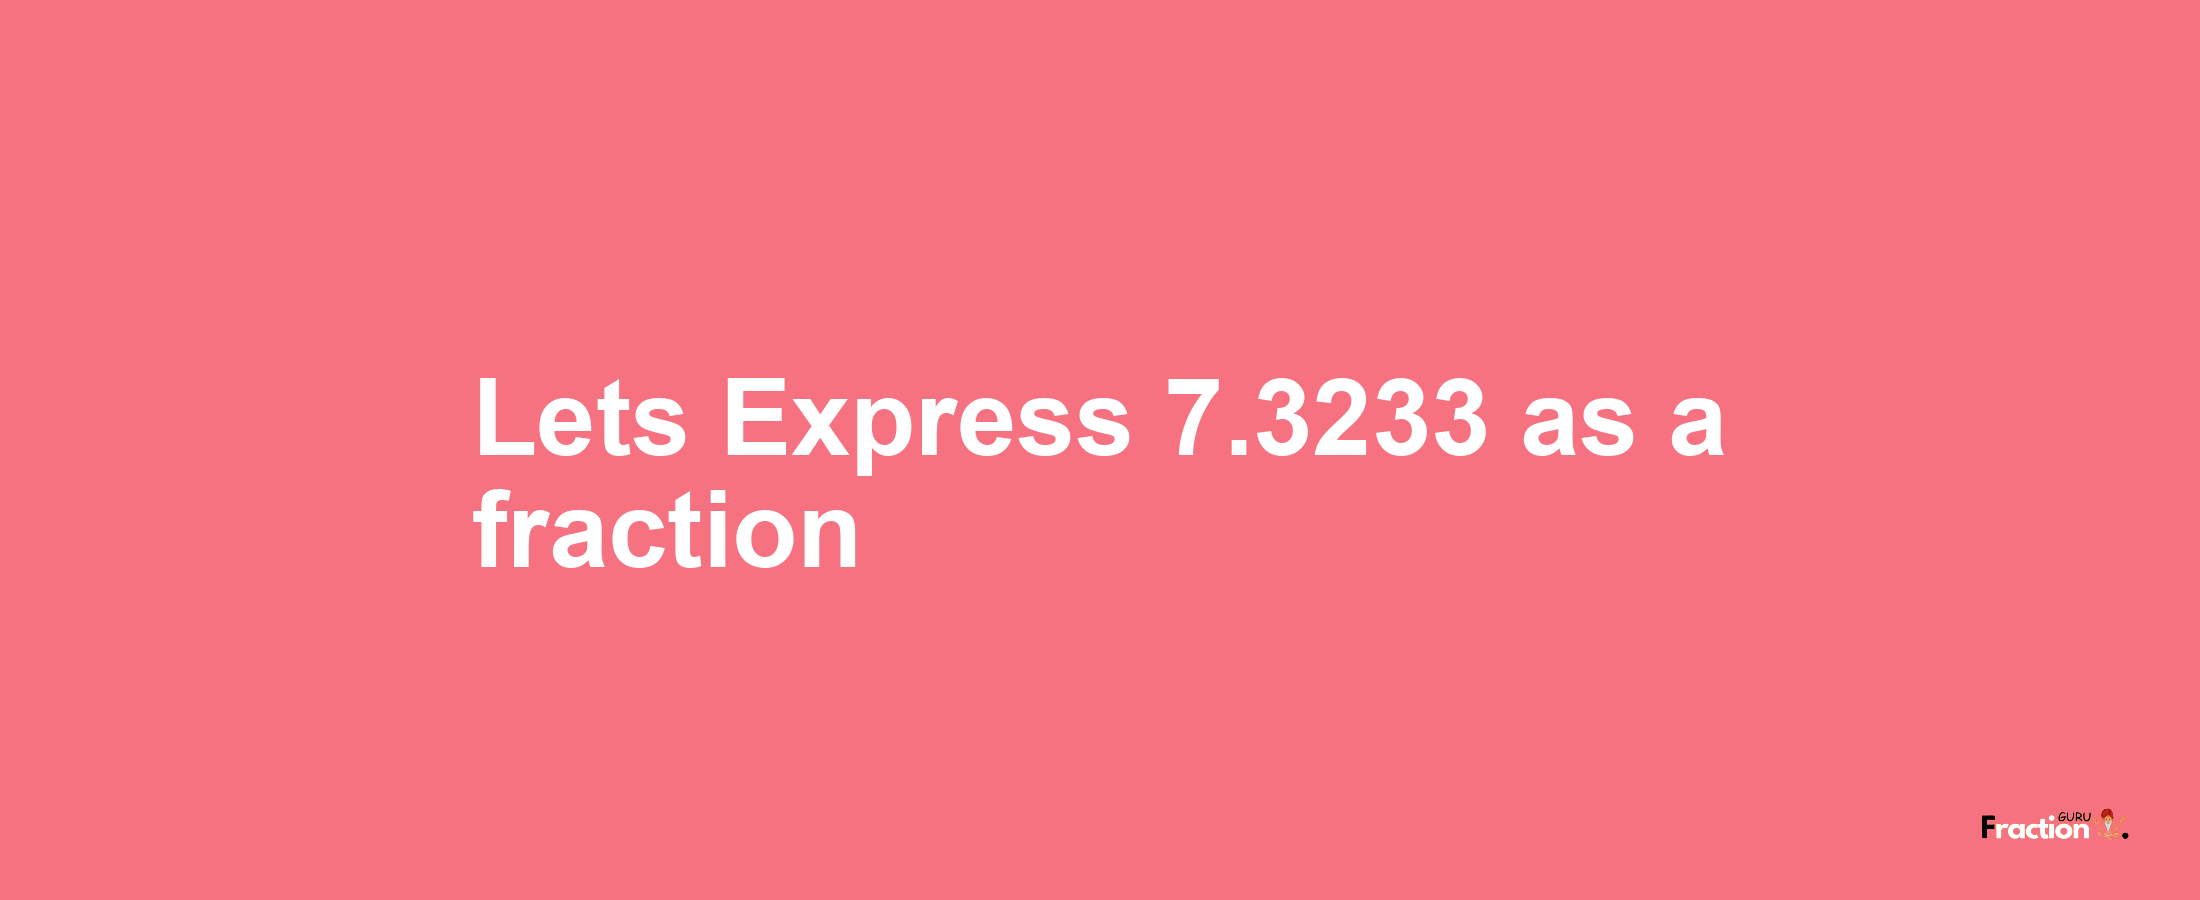 Lets Express 7.3233 as afraction